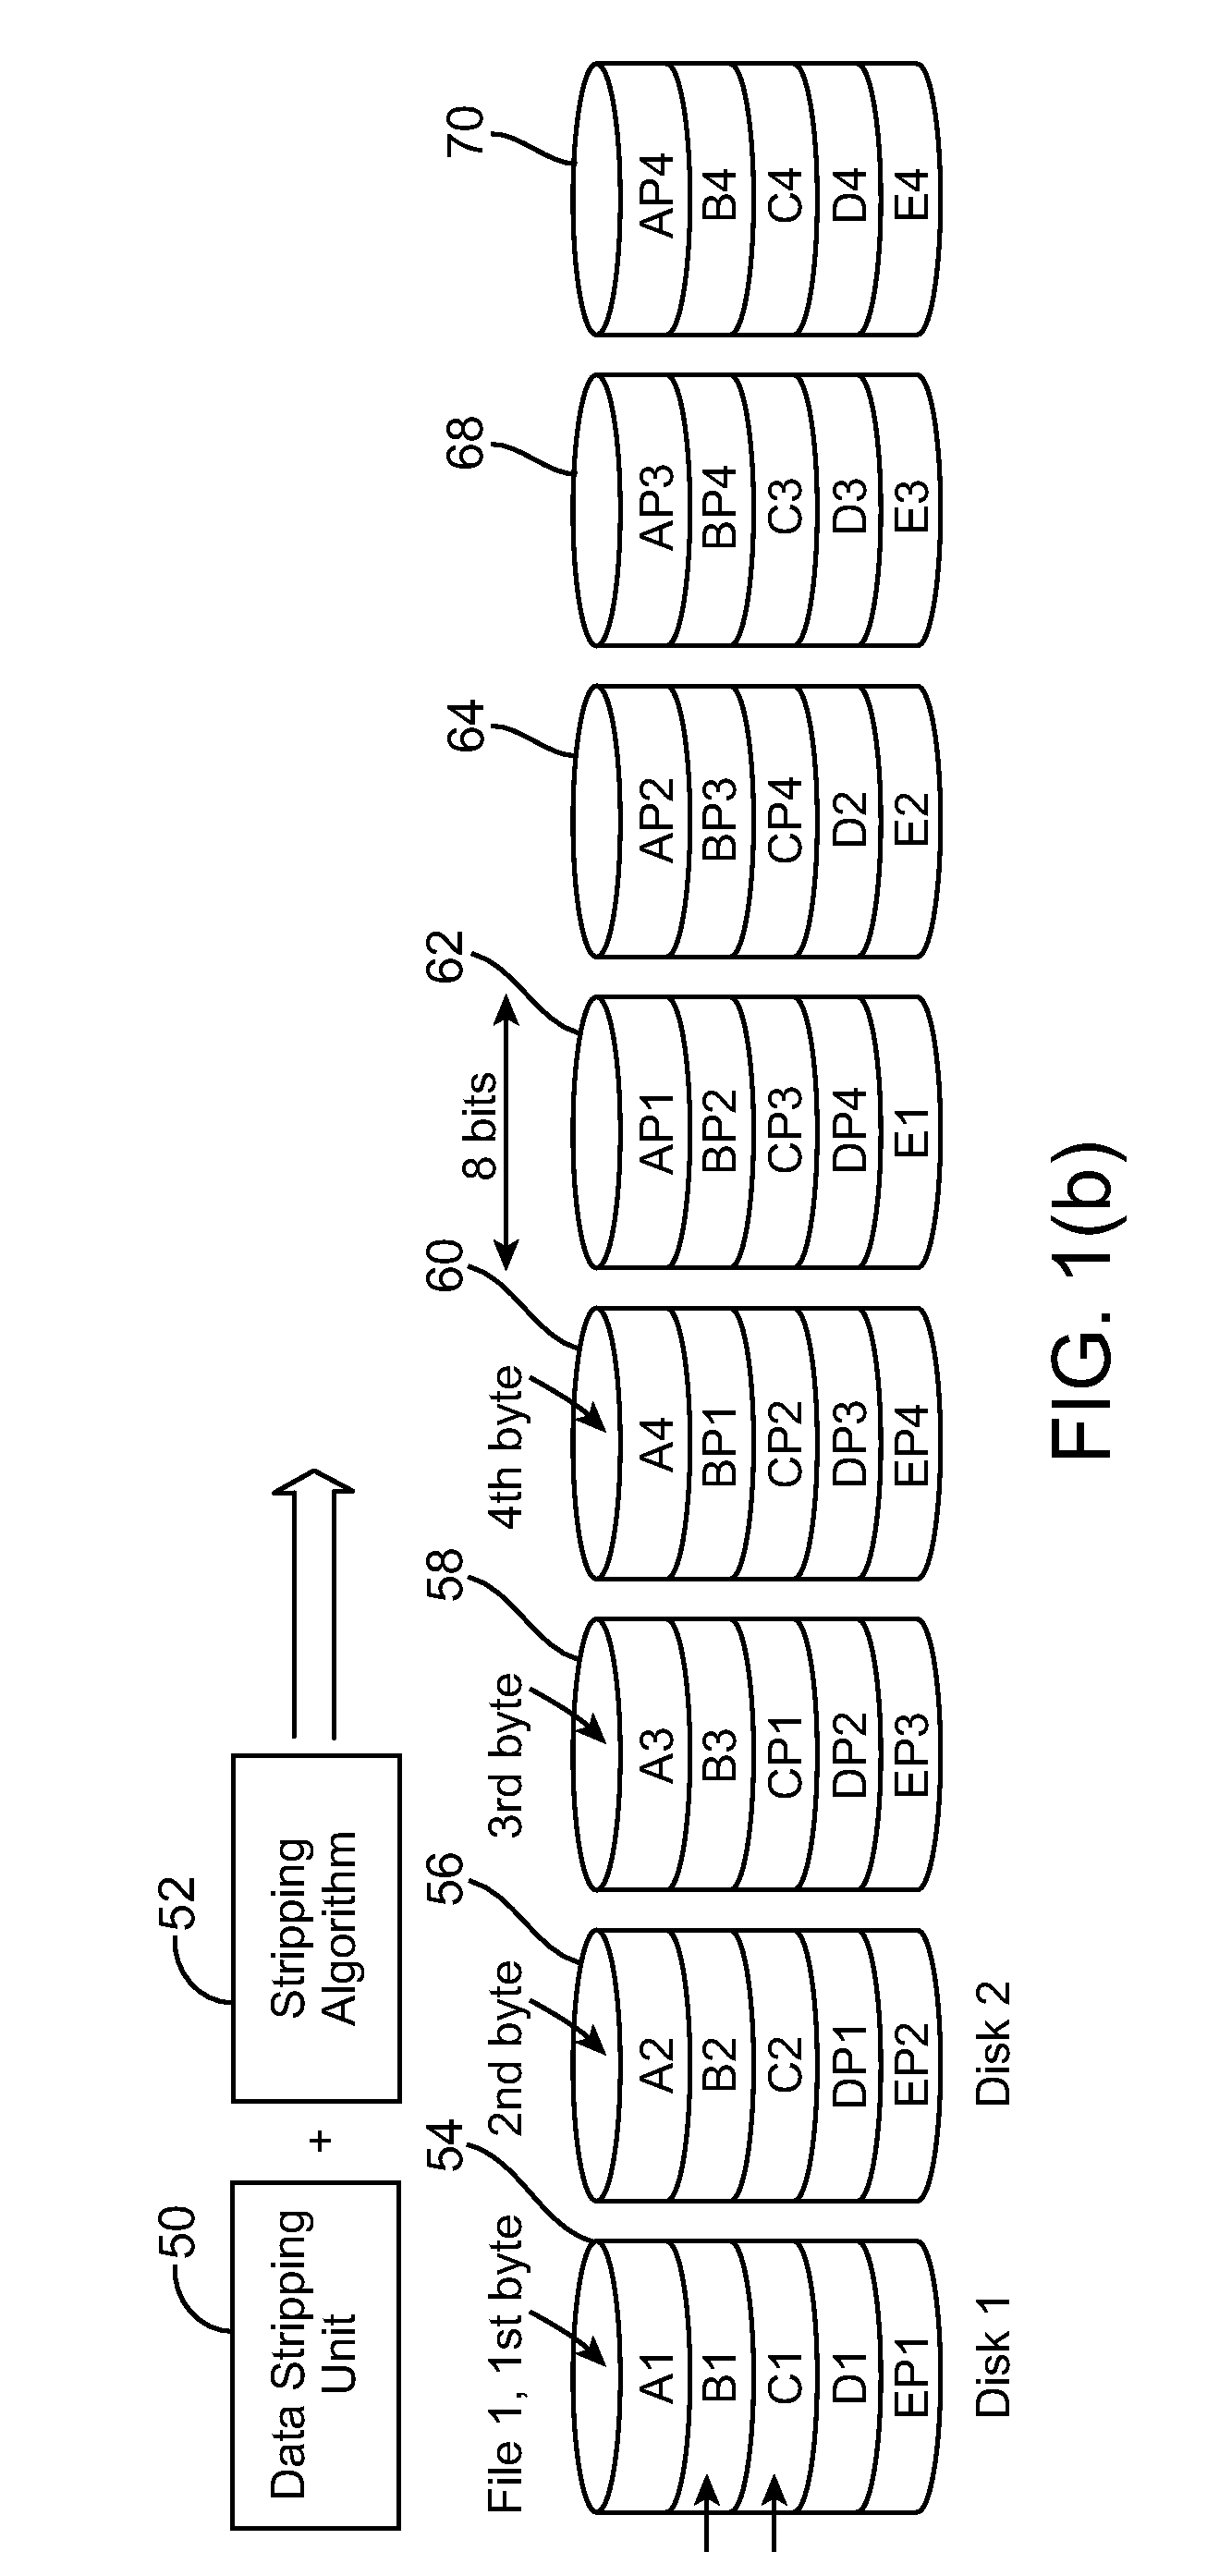 Method of Error Correction Code on Solid State Disk to Gain Data Security and Higher Performance